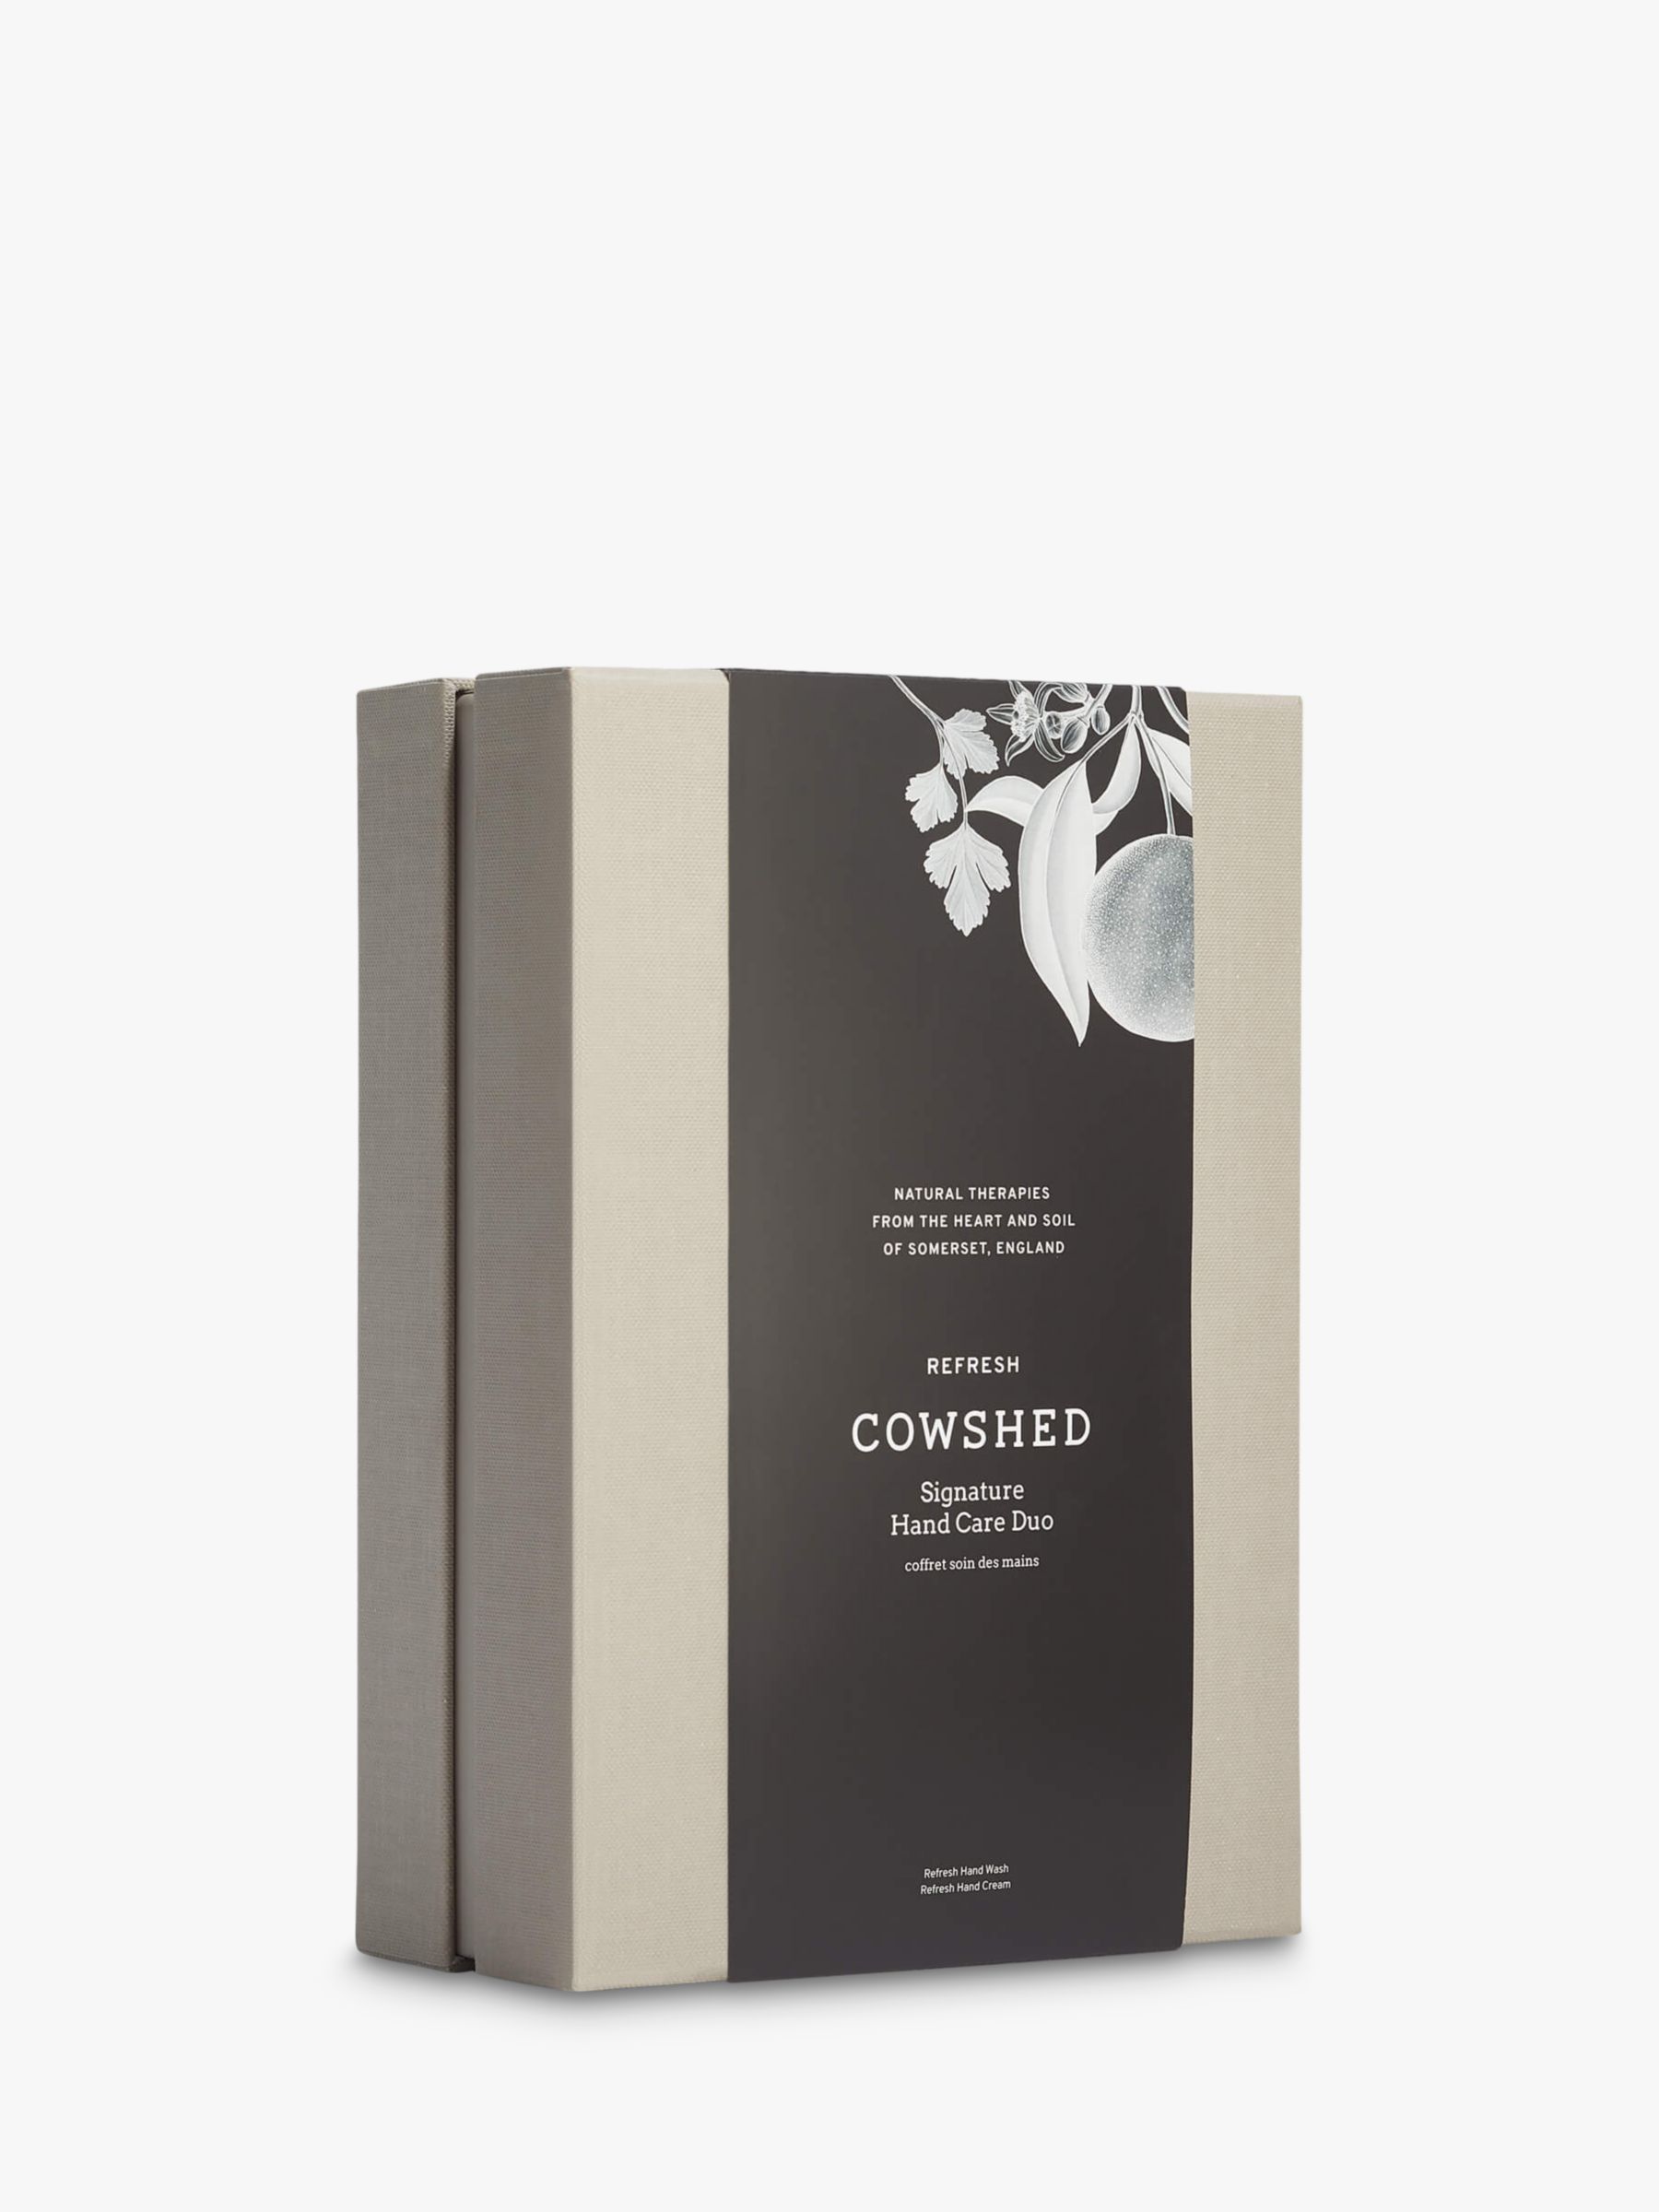 Cowshed Signature Hand Care Duo Bodycare Gift Set 4